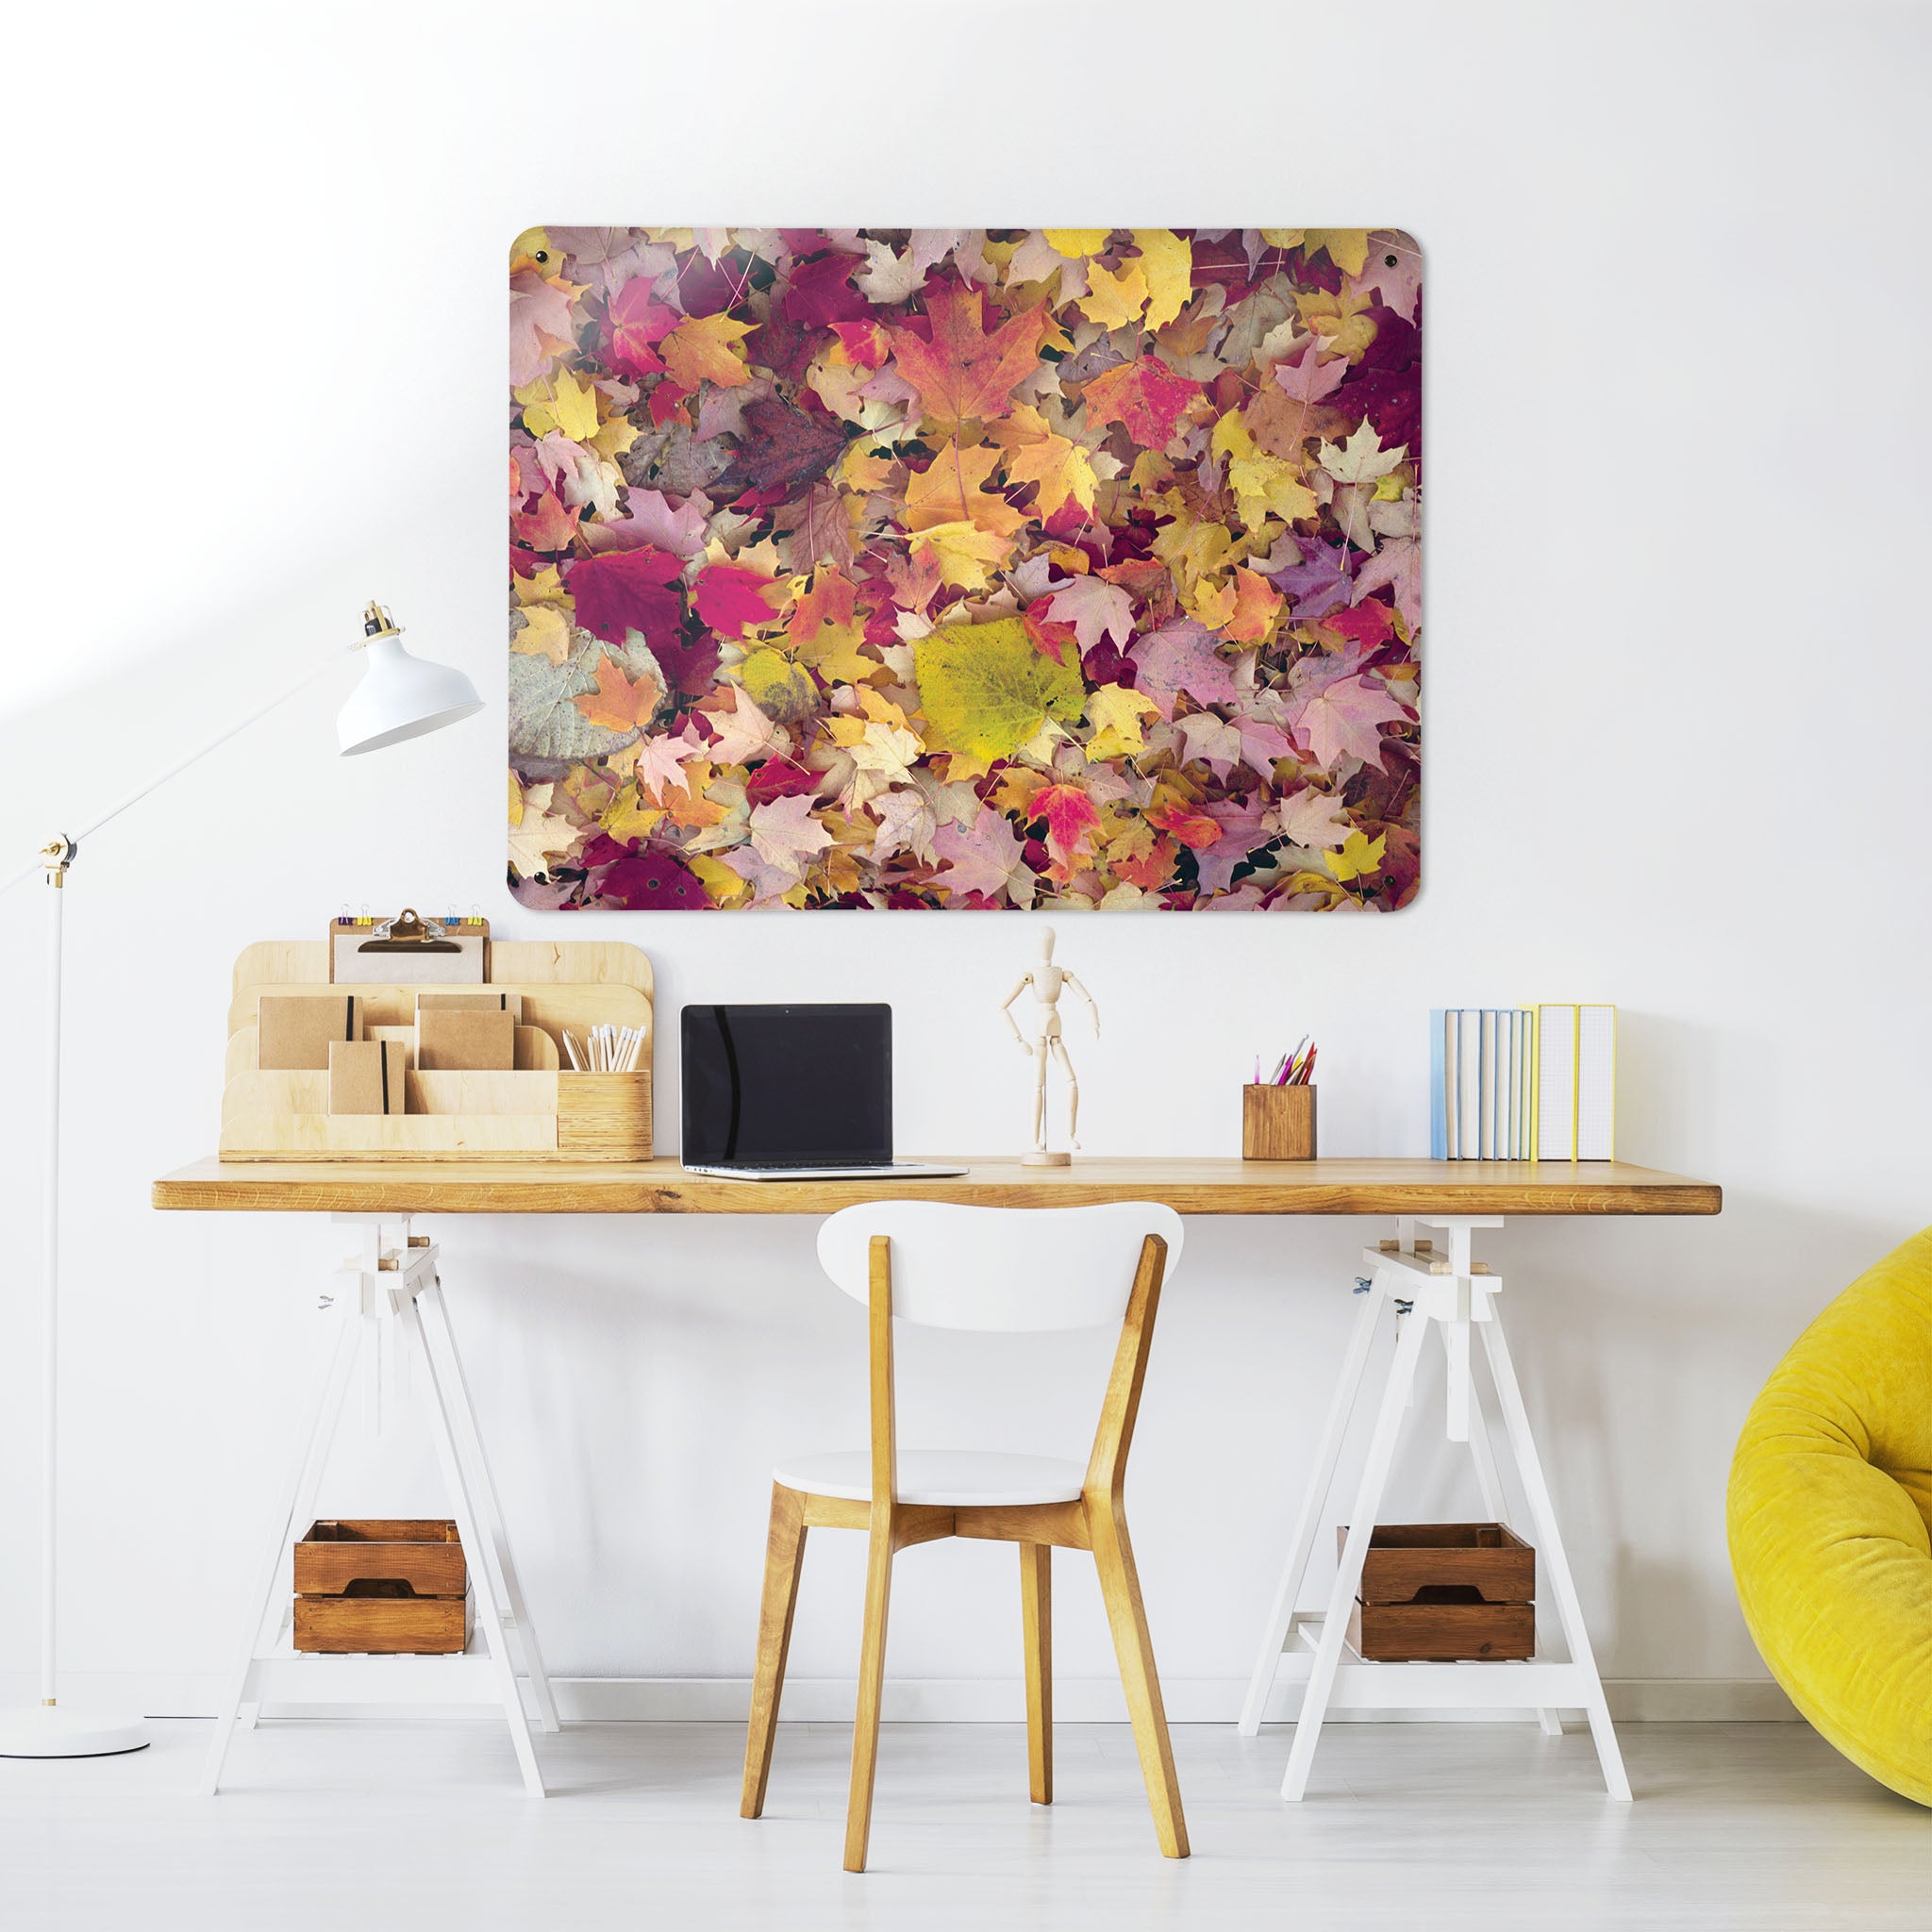 A desk in a workspace setting in a white interior with a magnetic metal wall art panel showing a photograph of autumn leaves